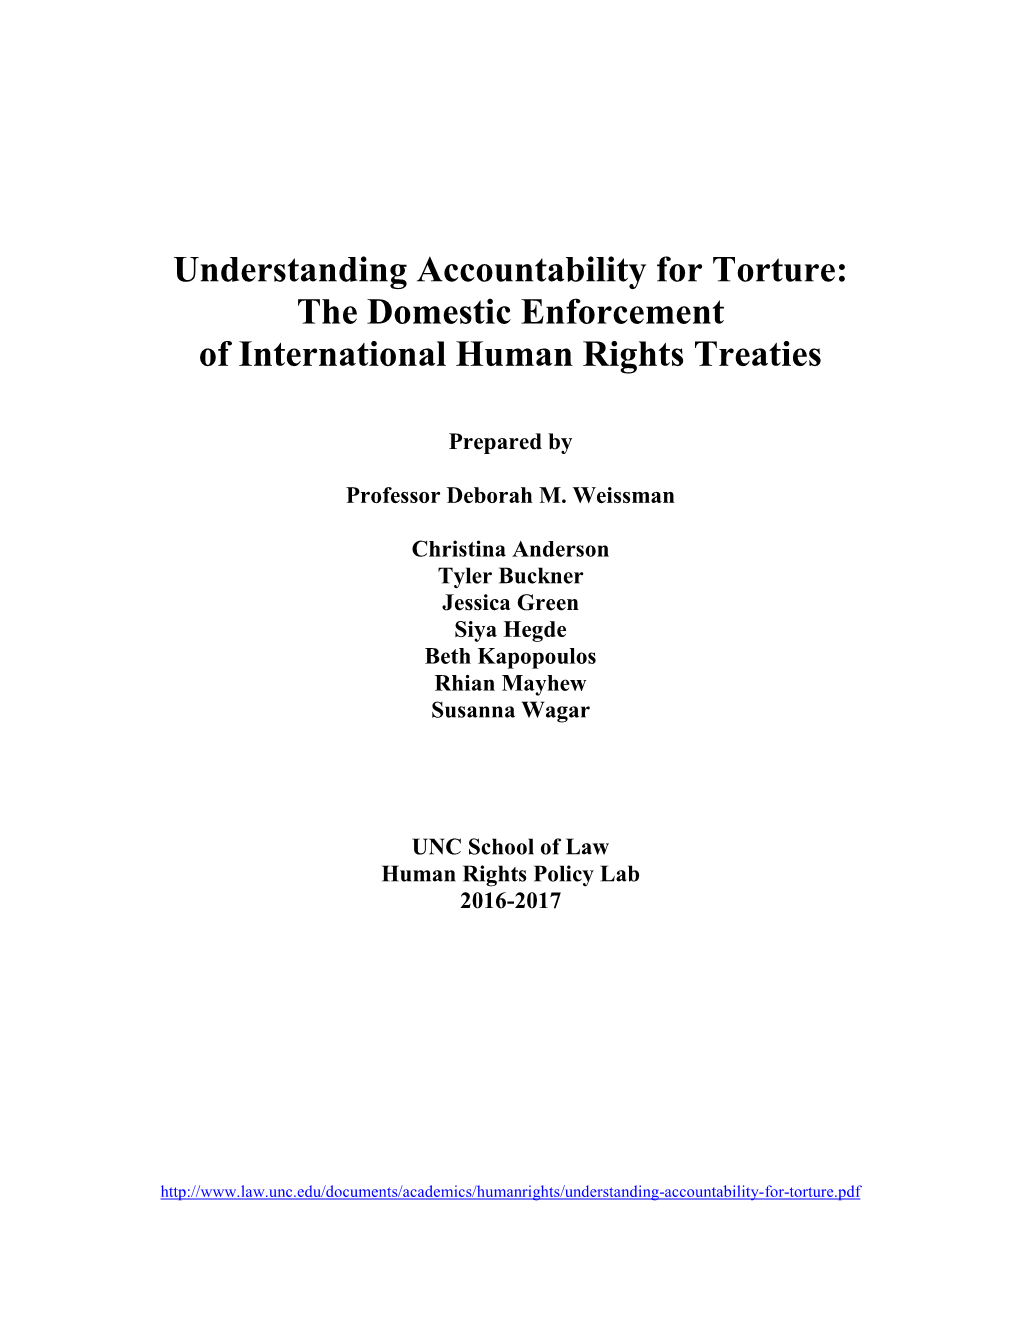 Understanding Accountability for Torture: the Domestic Enforcement of International Human Rights Treaties